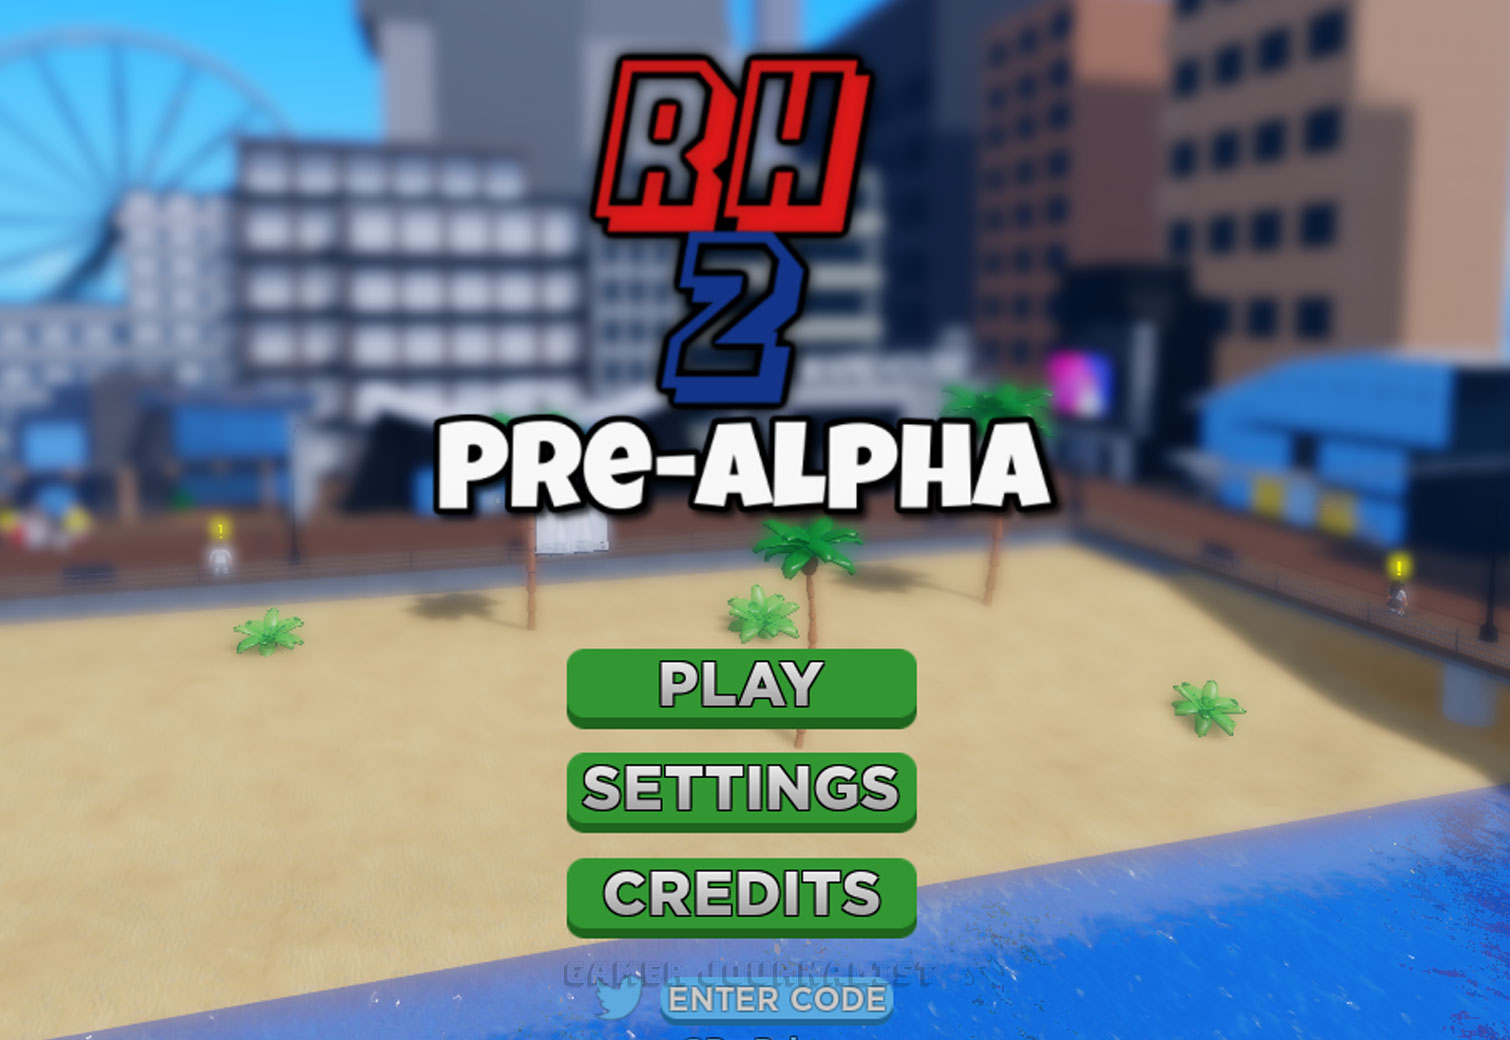 How to redeem codes for RH2 The Journey on Roblox